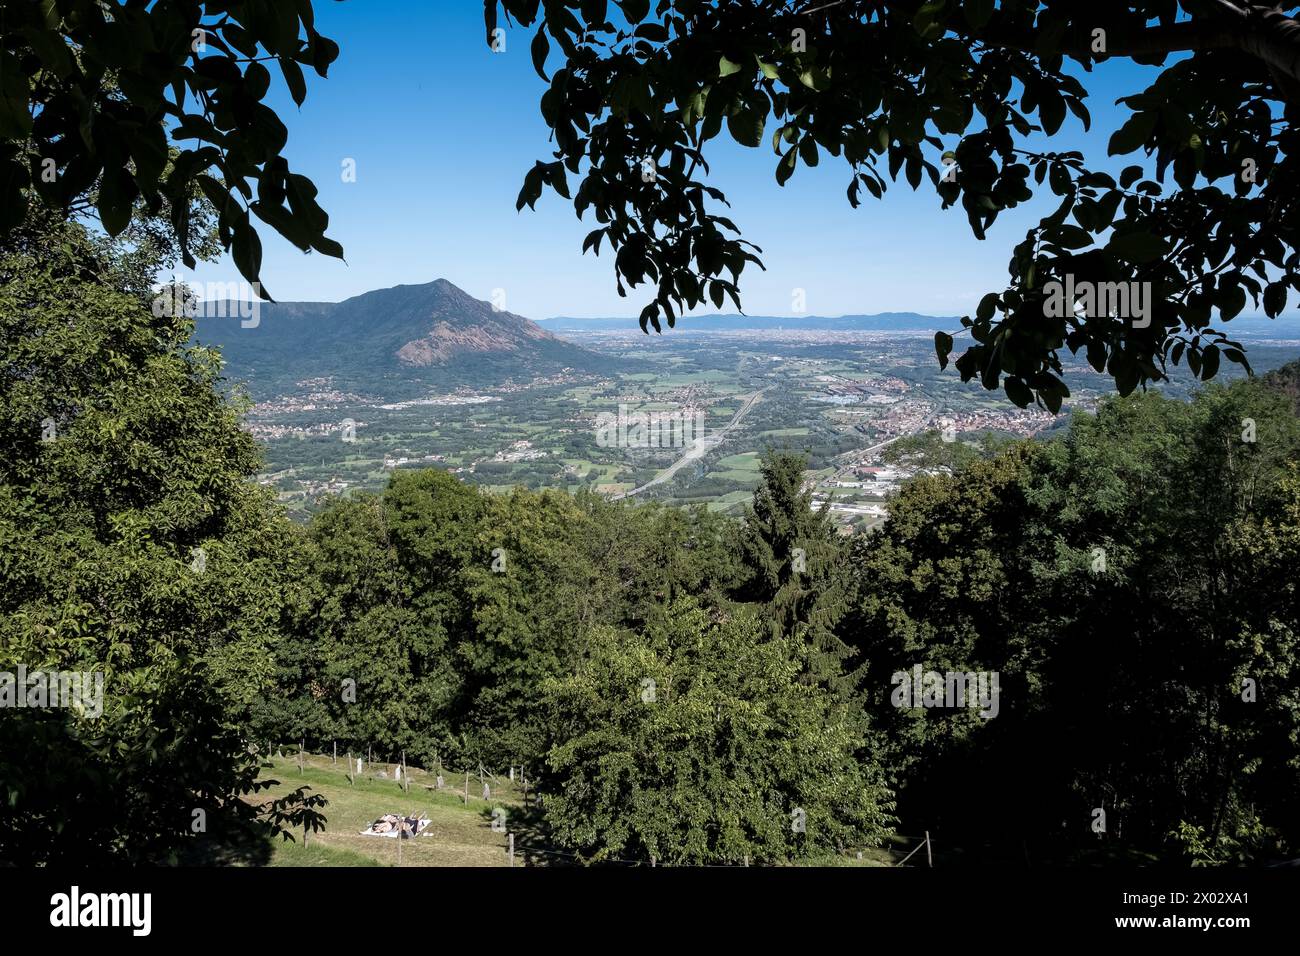 View of the City of Turin from the Sacra di San Michele, (Saint Michael's Abbey), on Mount Pirchiriano, on south side of the Val di Susa Stock Photo